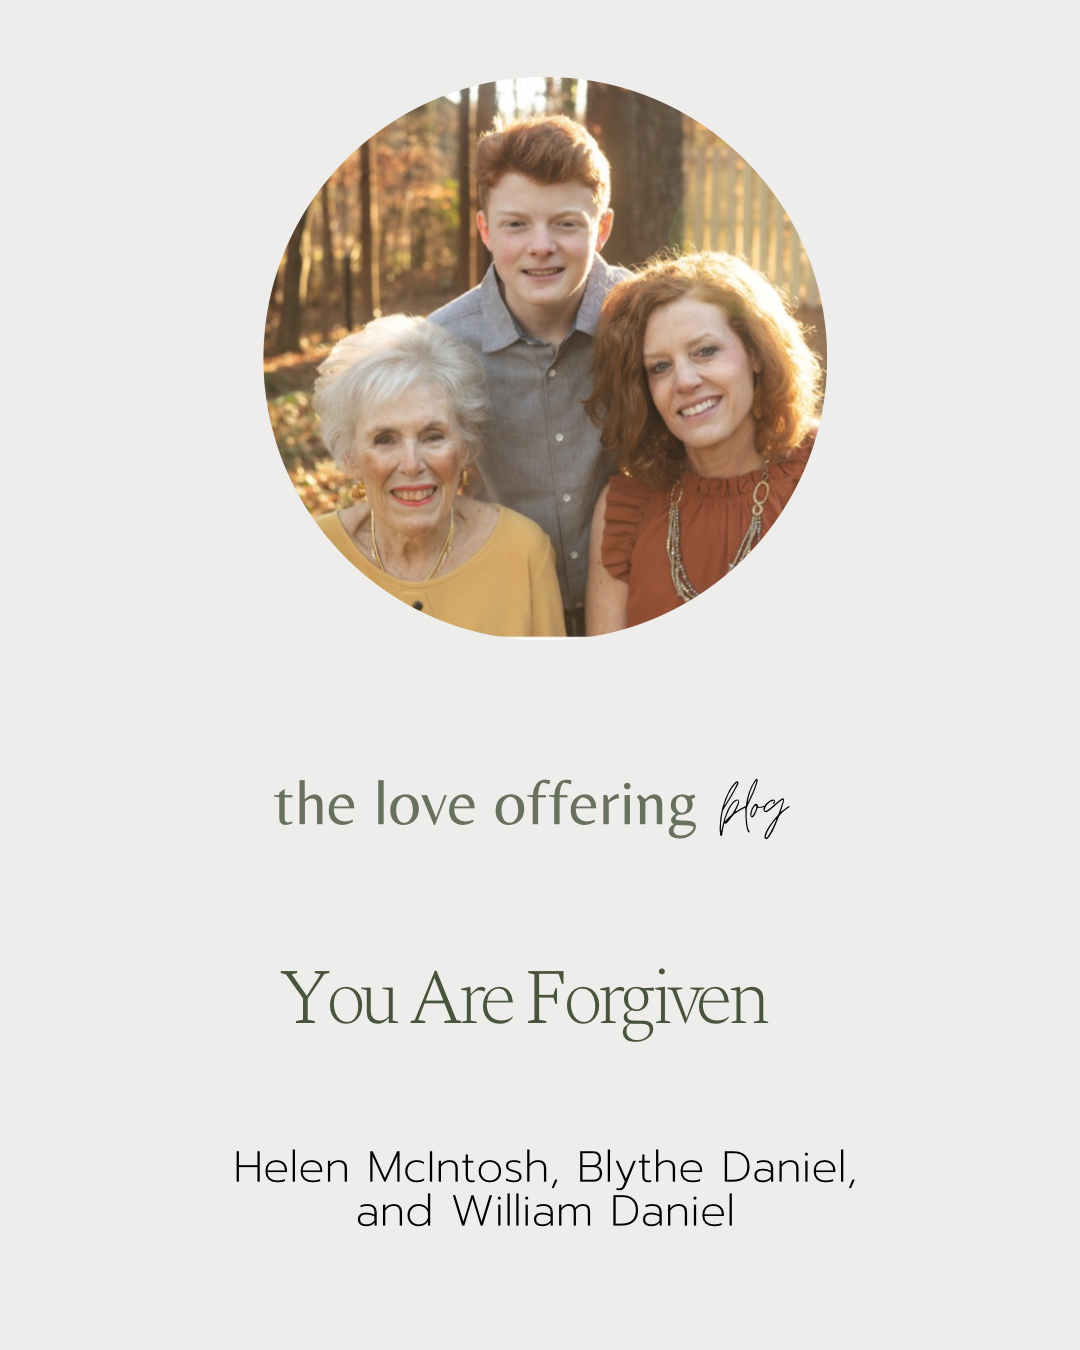 You Are Forgiven by Helen McIntosh, Blythe Daniel, and William Daniel